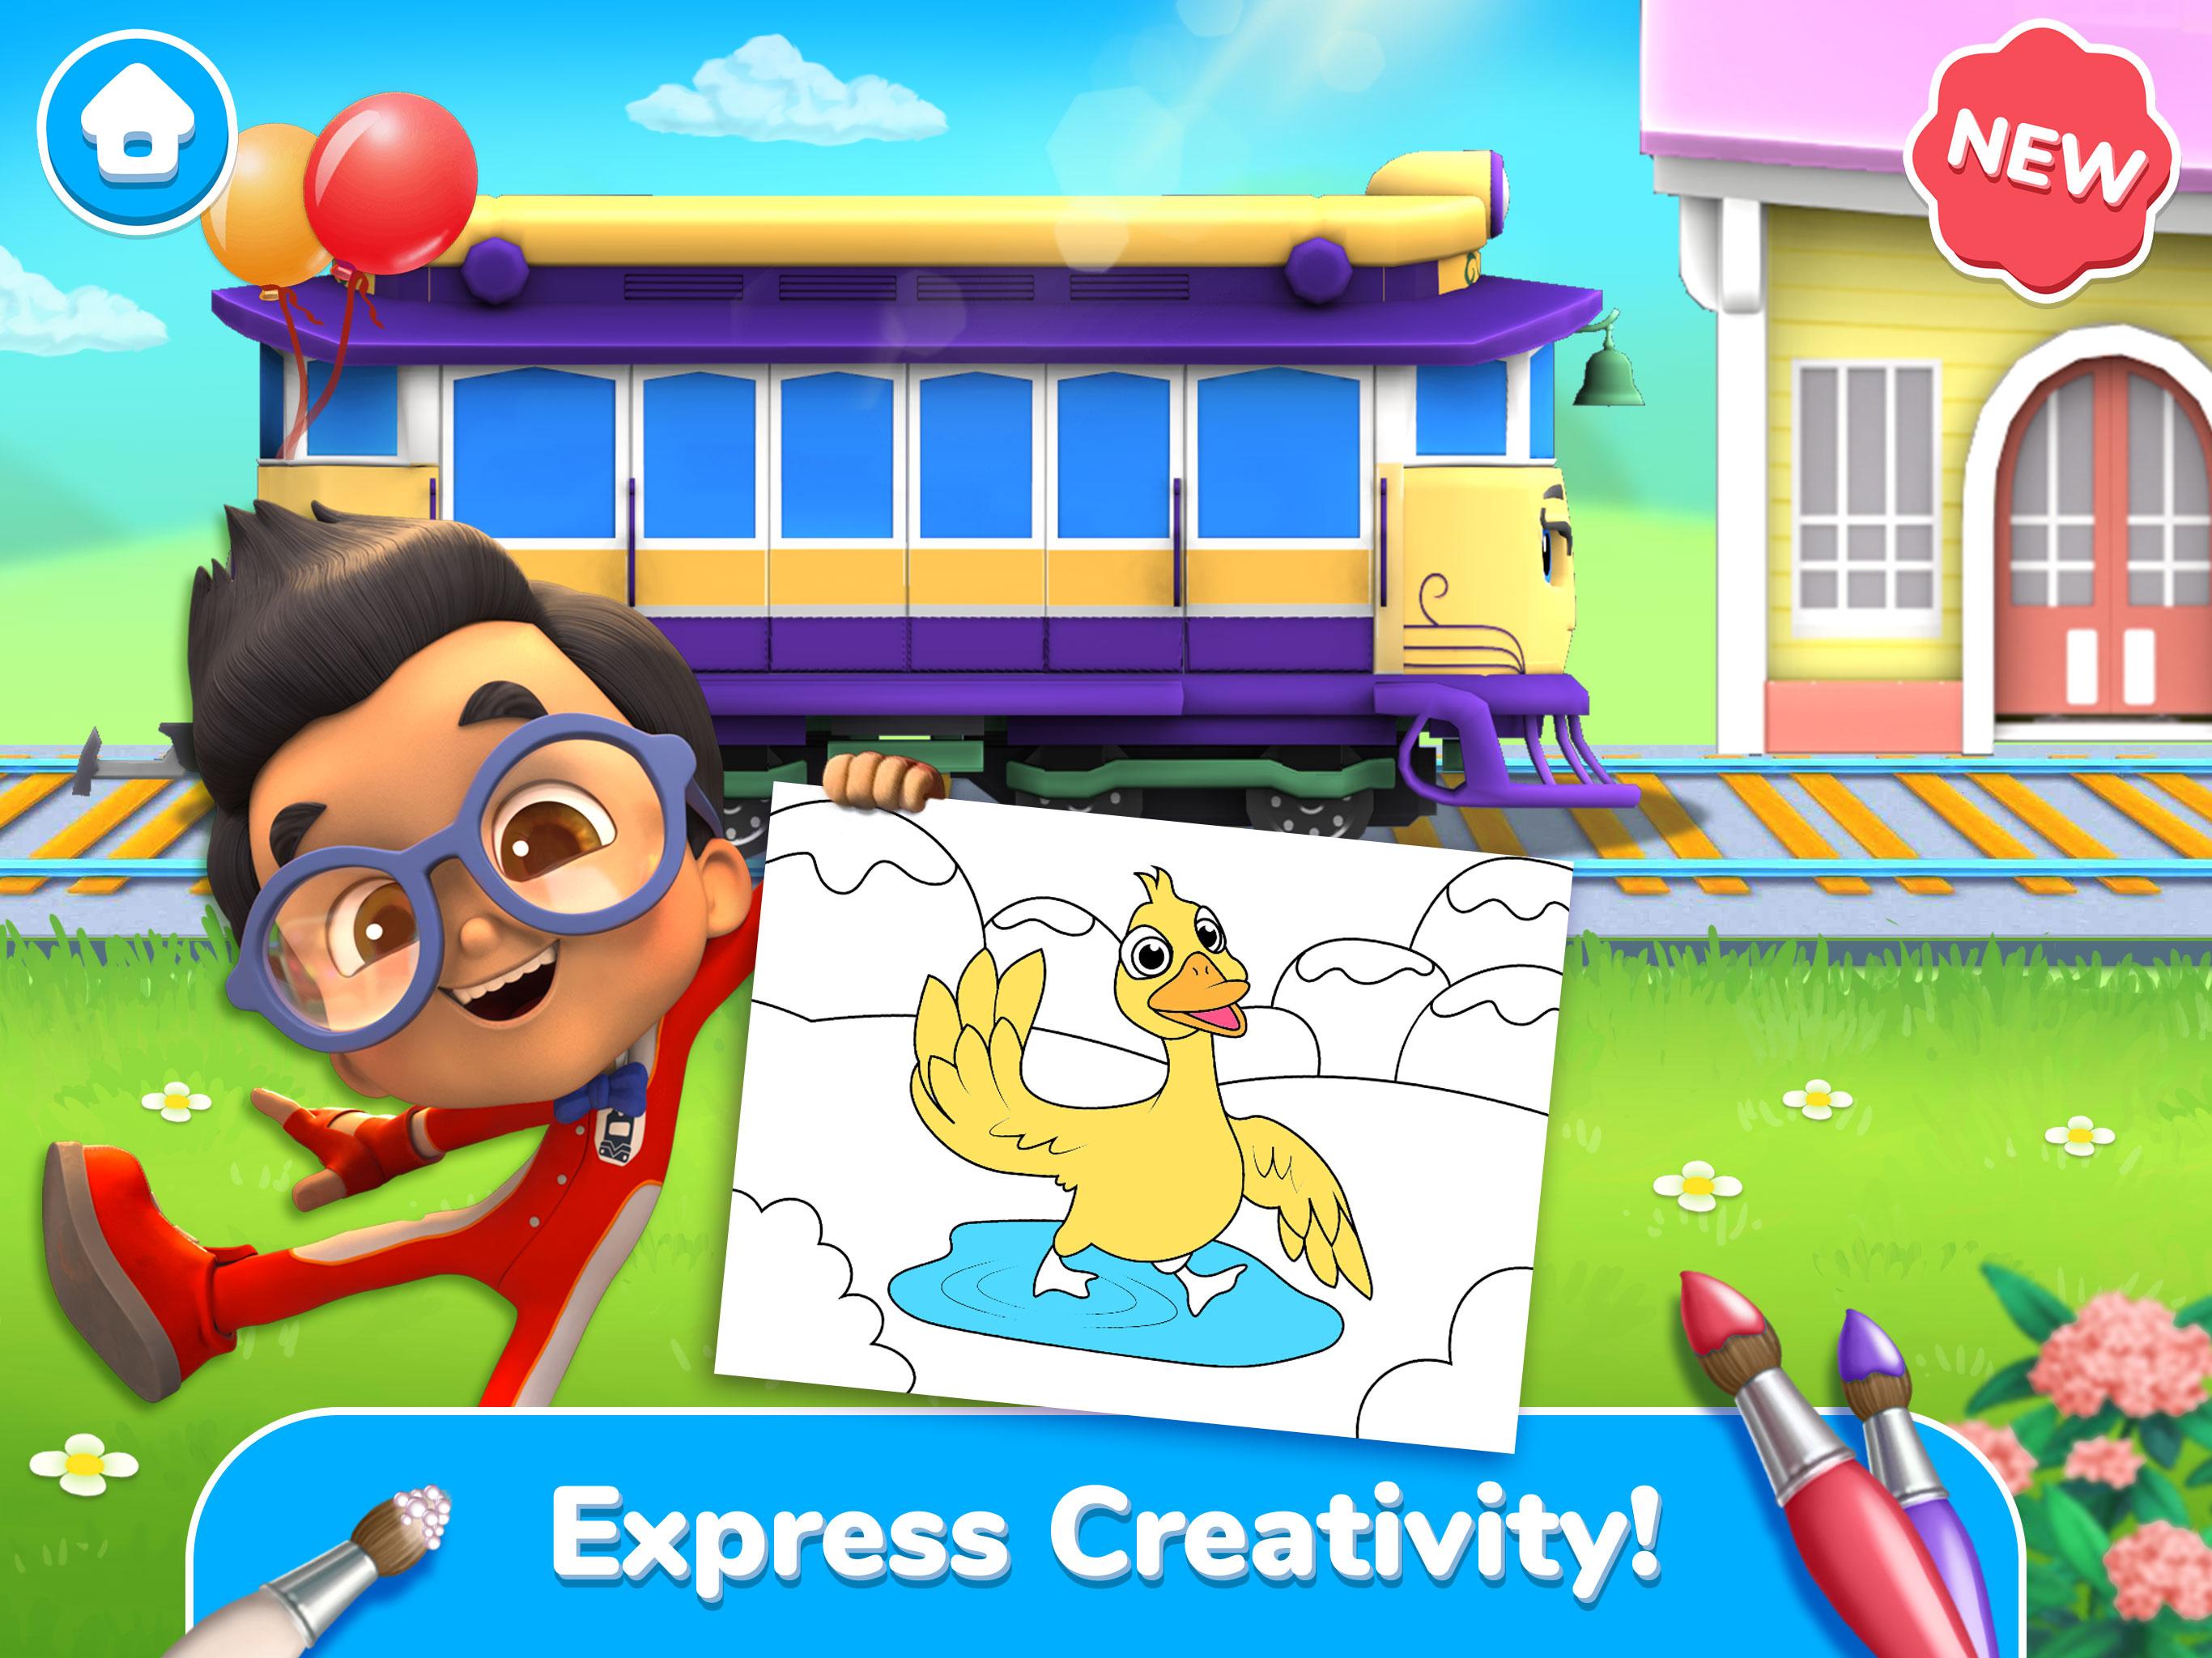 Mighty Express Play & Learn with Train Friends 1.3.1 Screenshot 9